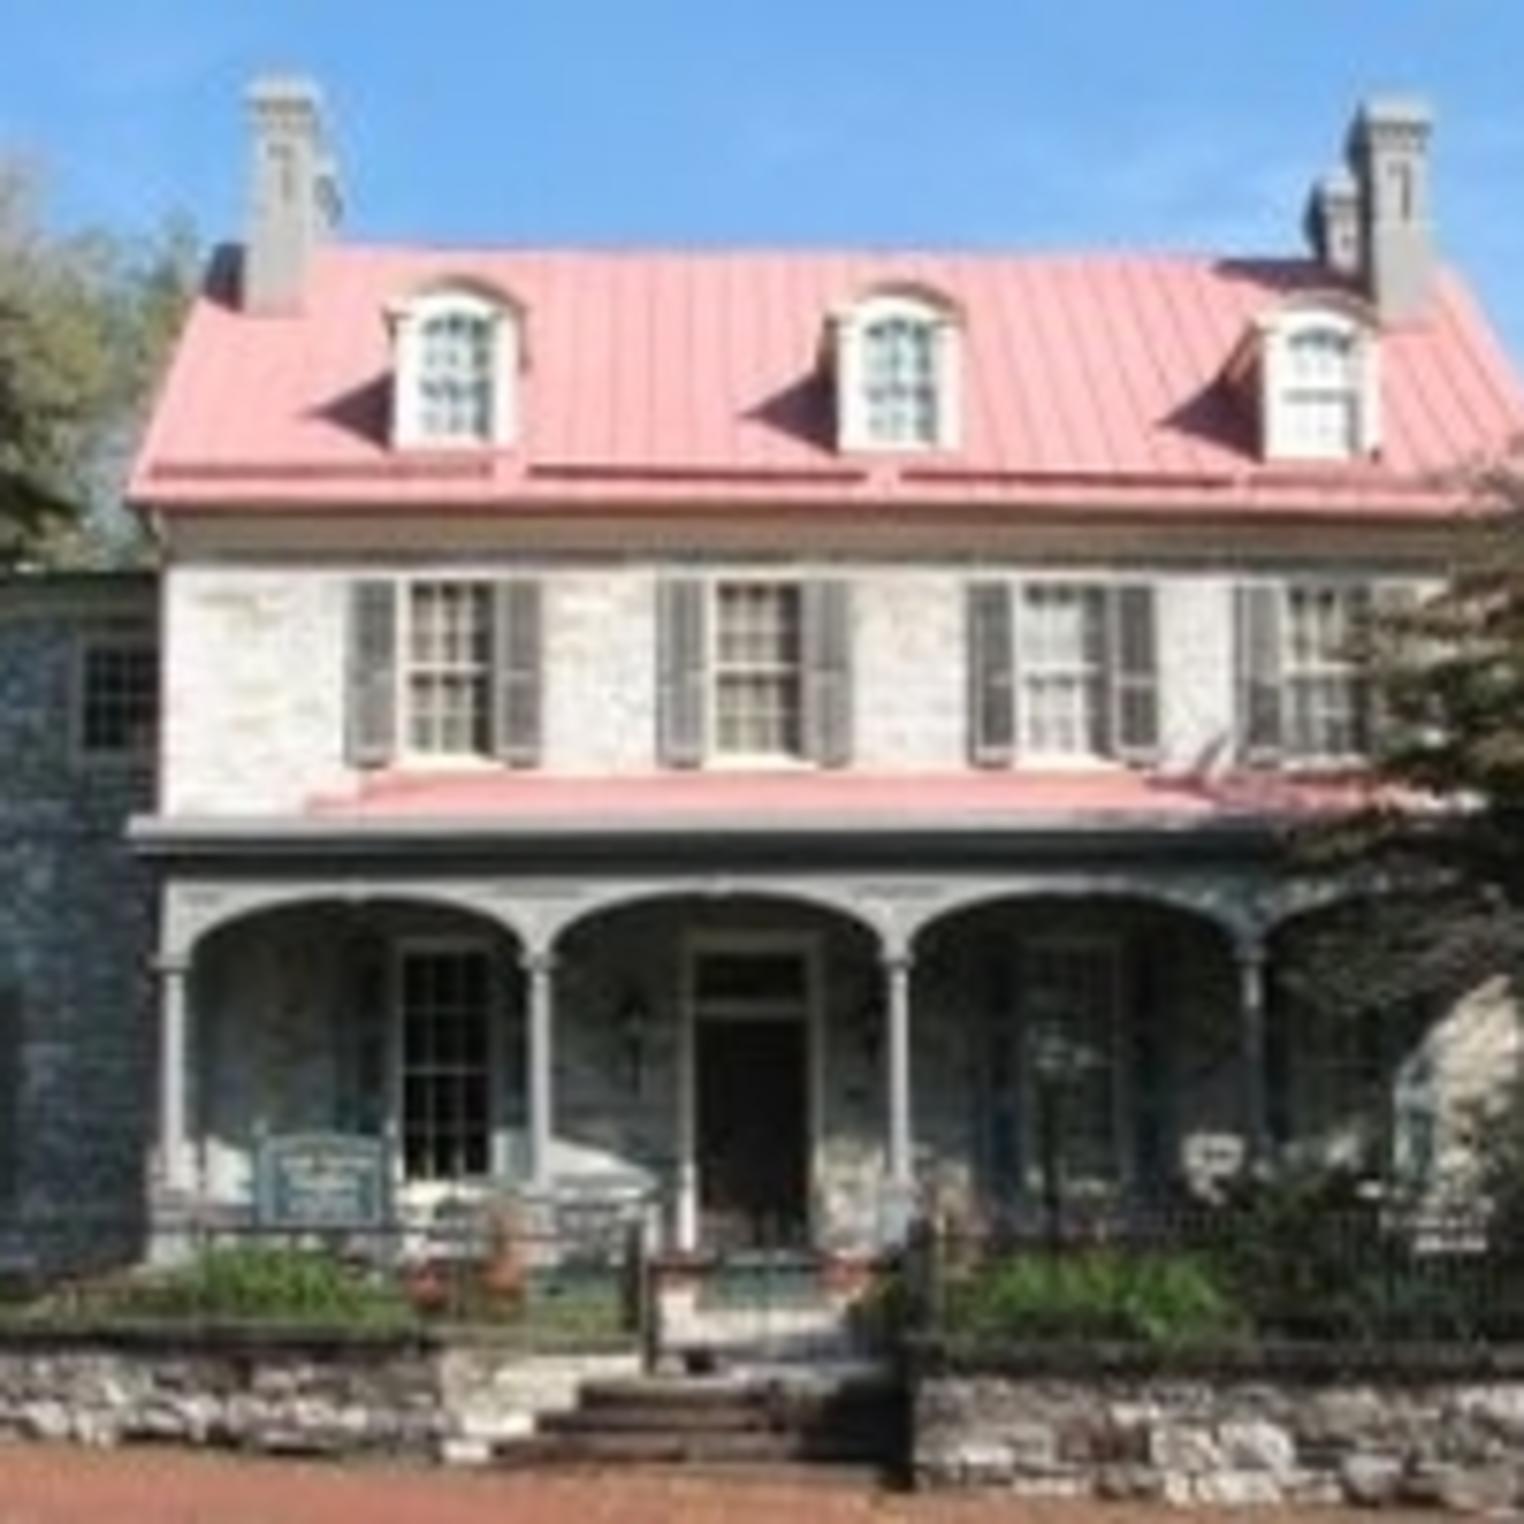 Historical Society of Dauphin County